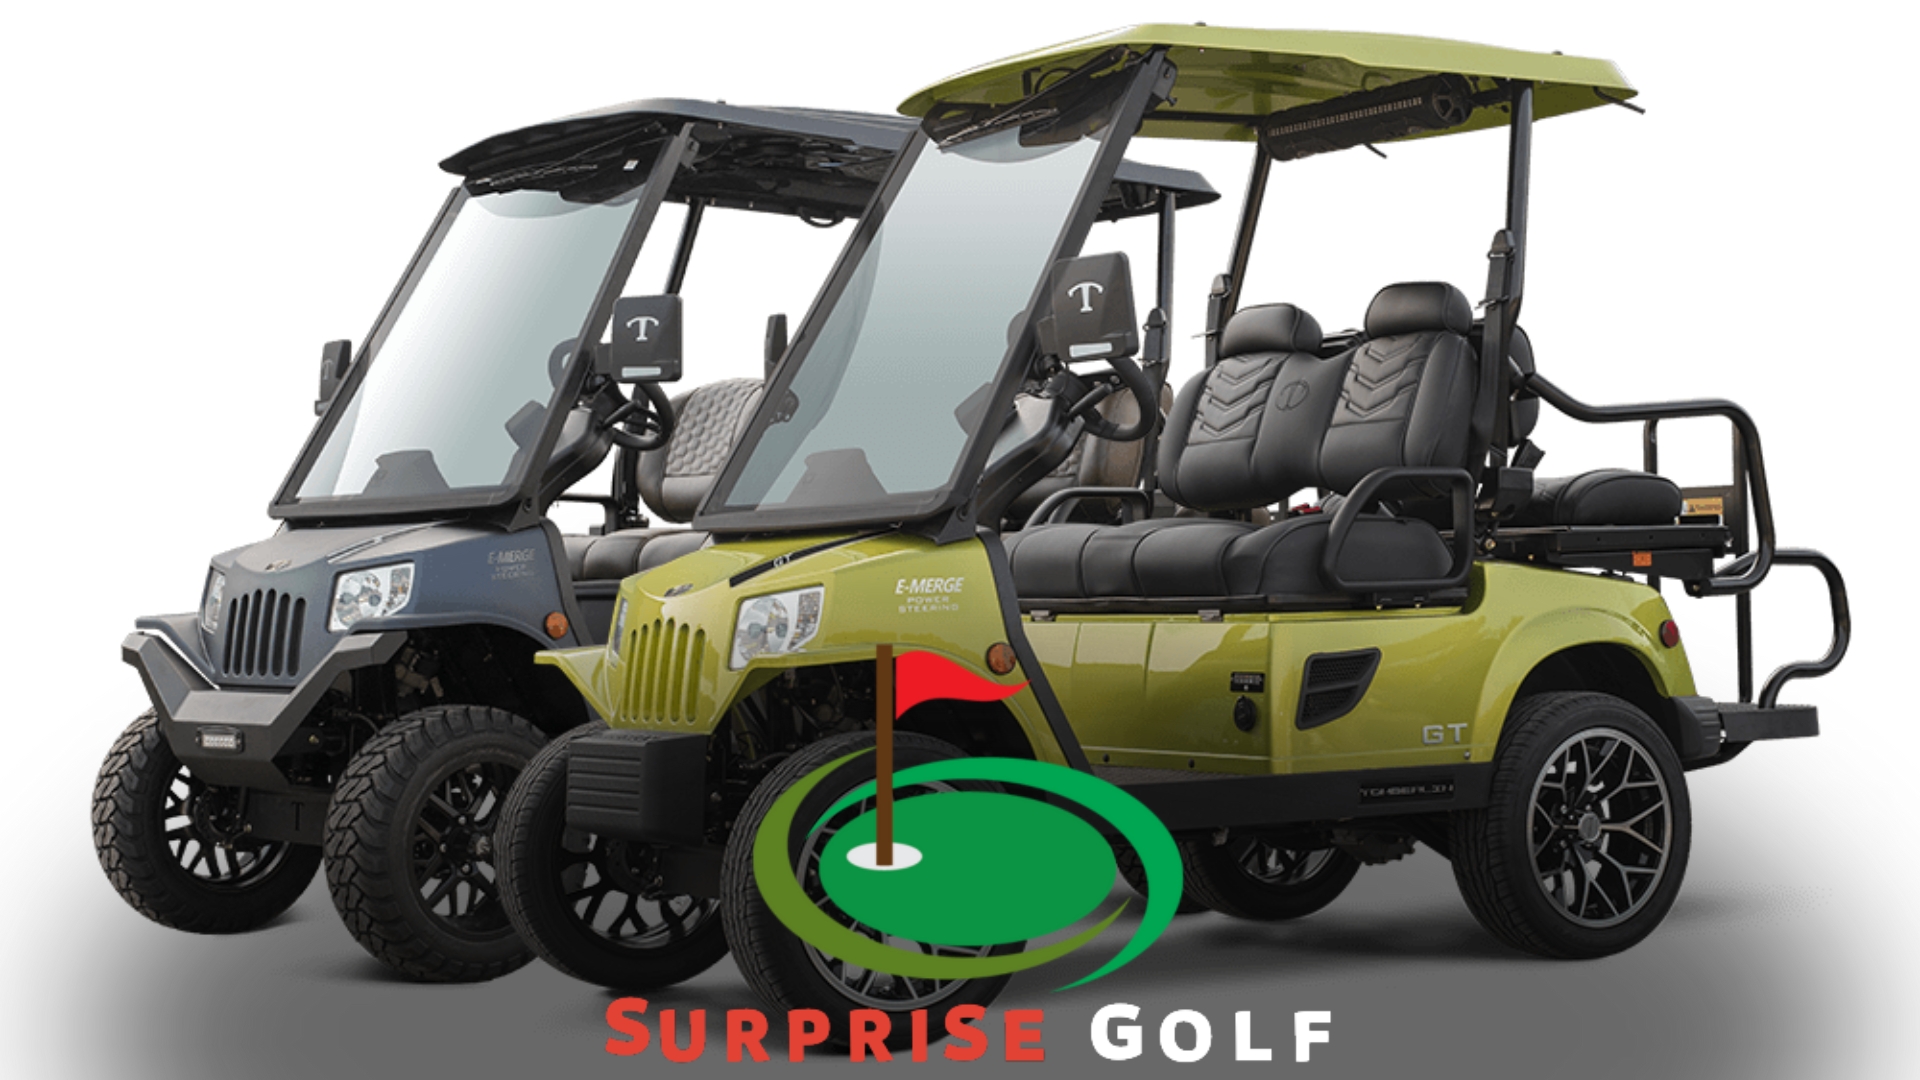 Where are Tomberlin Golf Carts Made